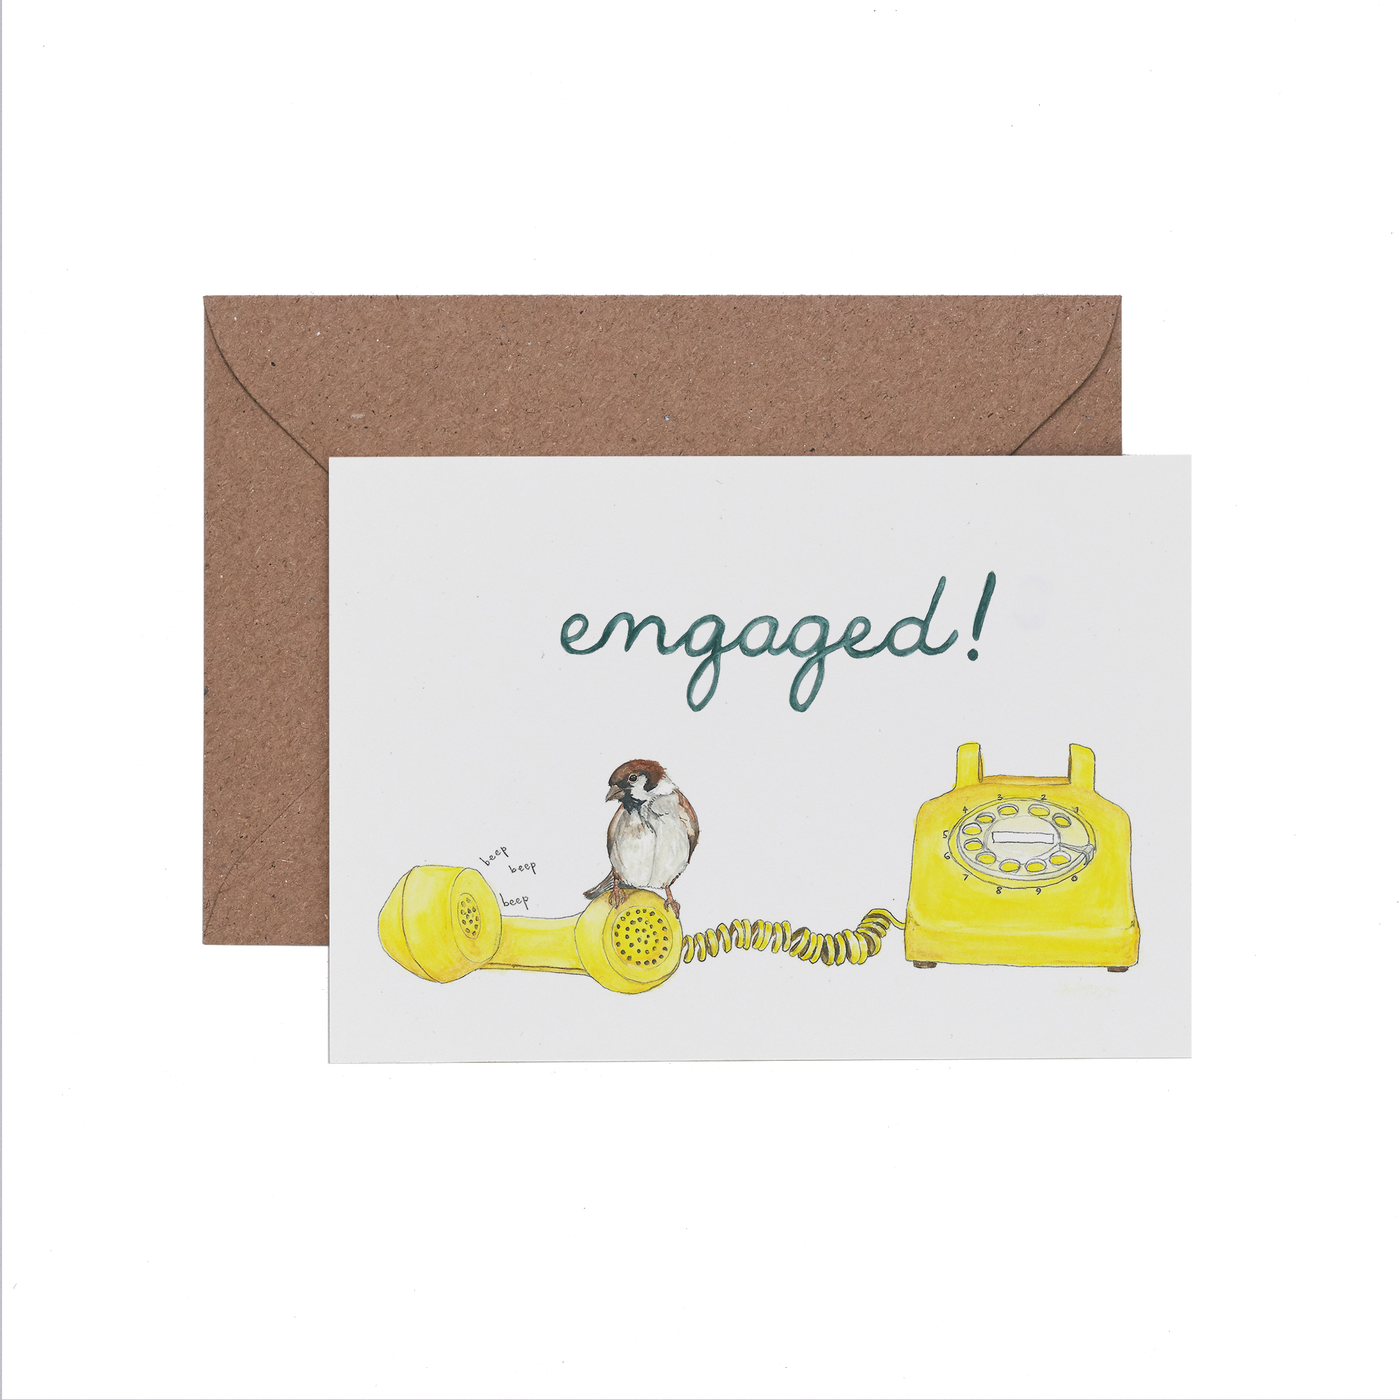 Engaged card cut out